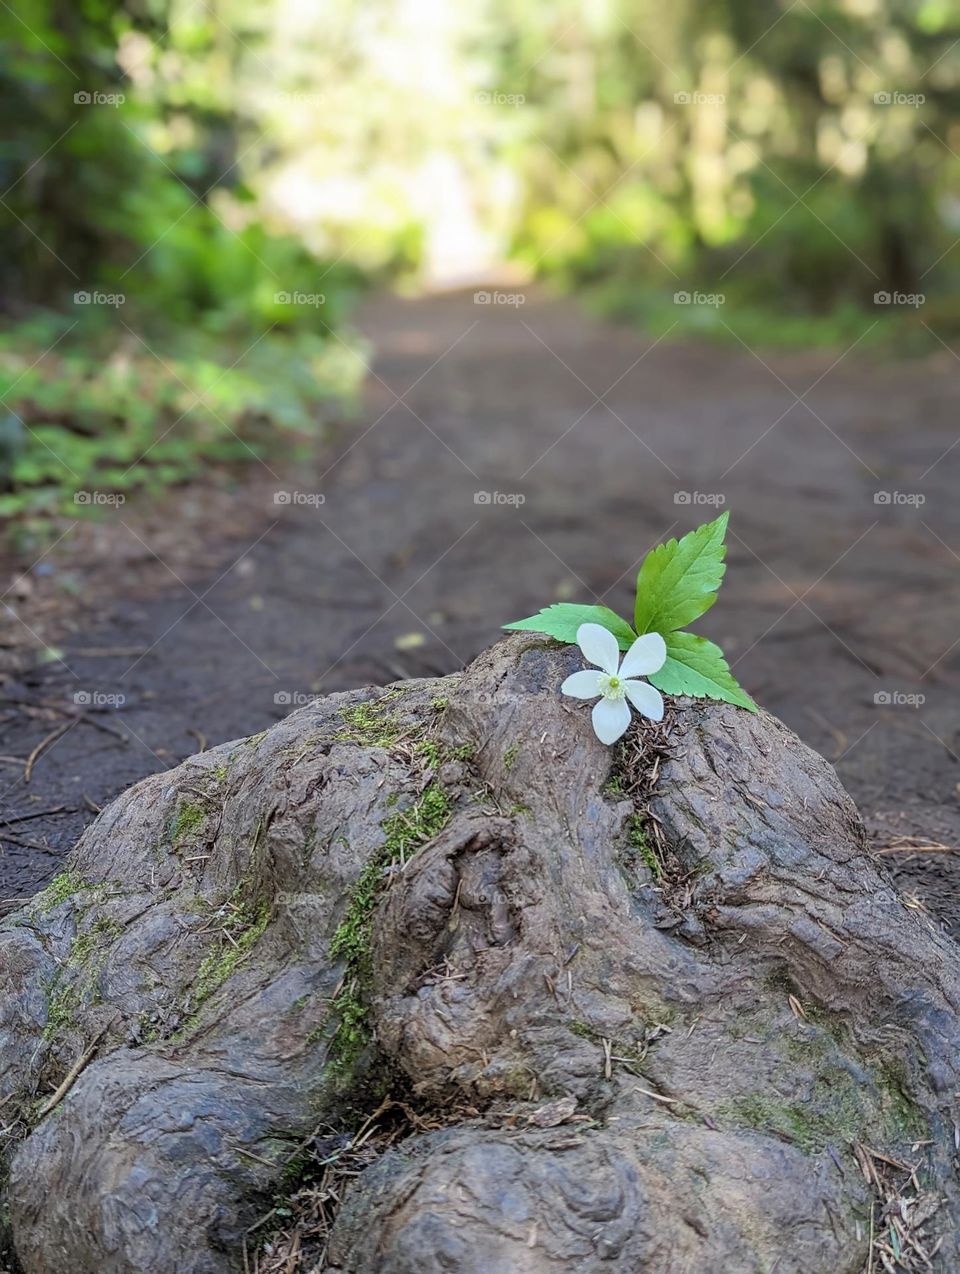 single white flower with three green leaves on a stem laying by itself on a rock in the forest